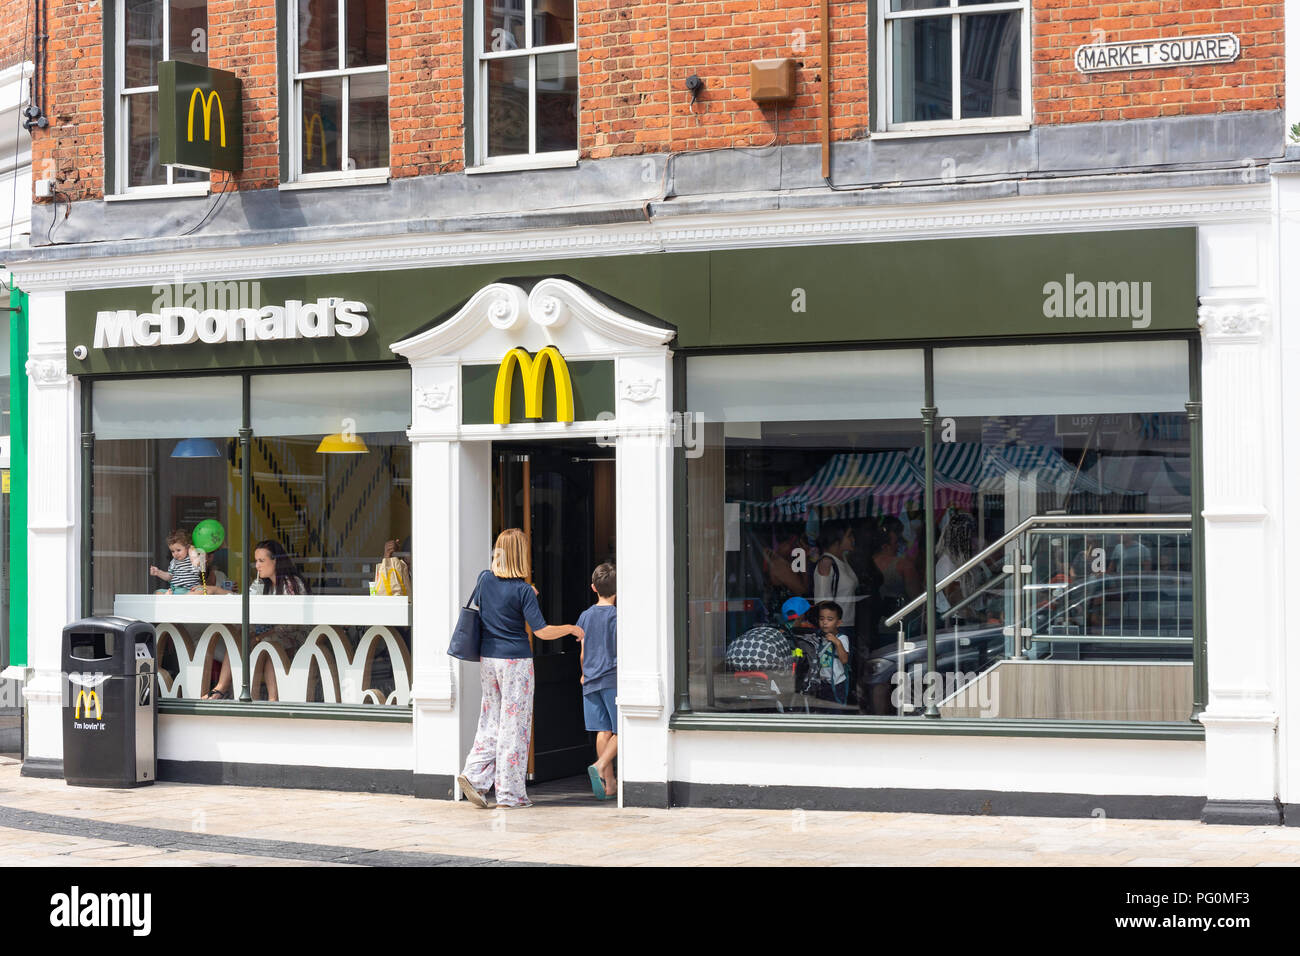 McDonald's restaurant fast food, Market Square, High Street, Bromley, London Borough of Bromley, Greater London, Angleterre, Royaume-Uni Banque D'Images